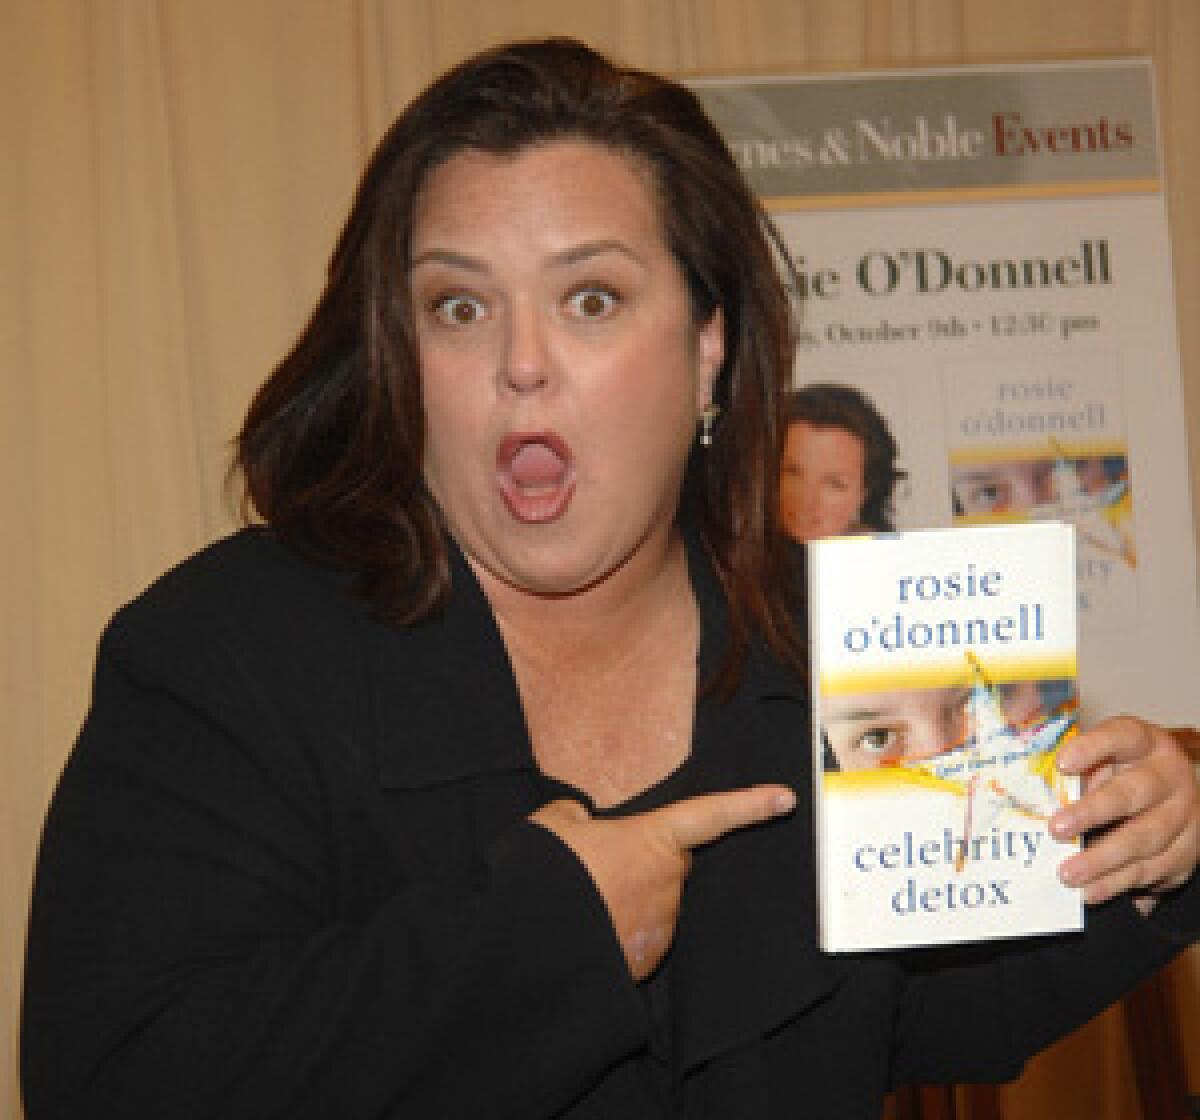 Rosie O'Donnell last month at a book signing for her "Celebrity Detox."